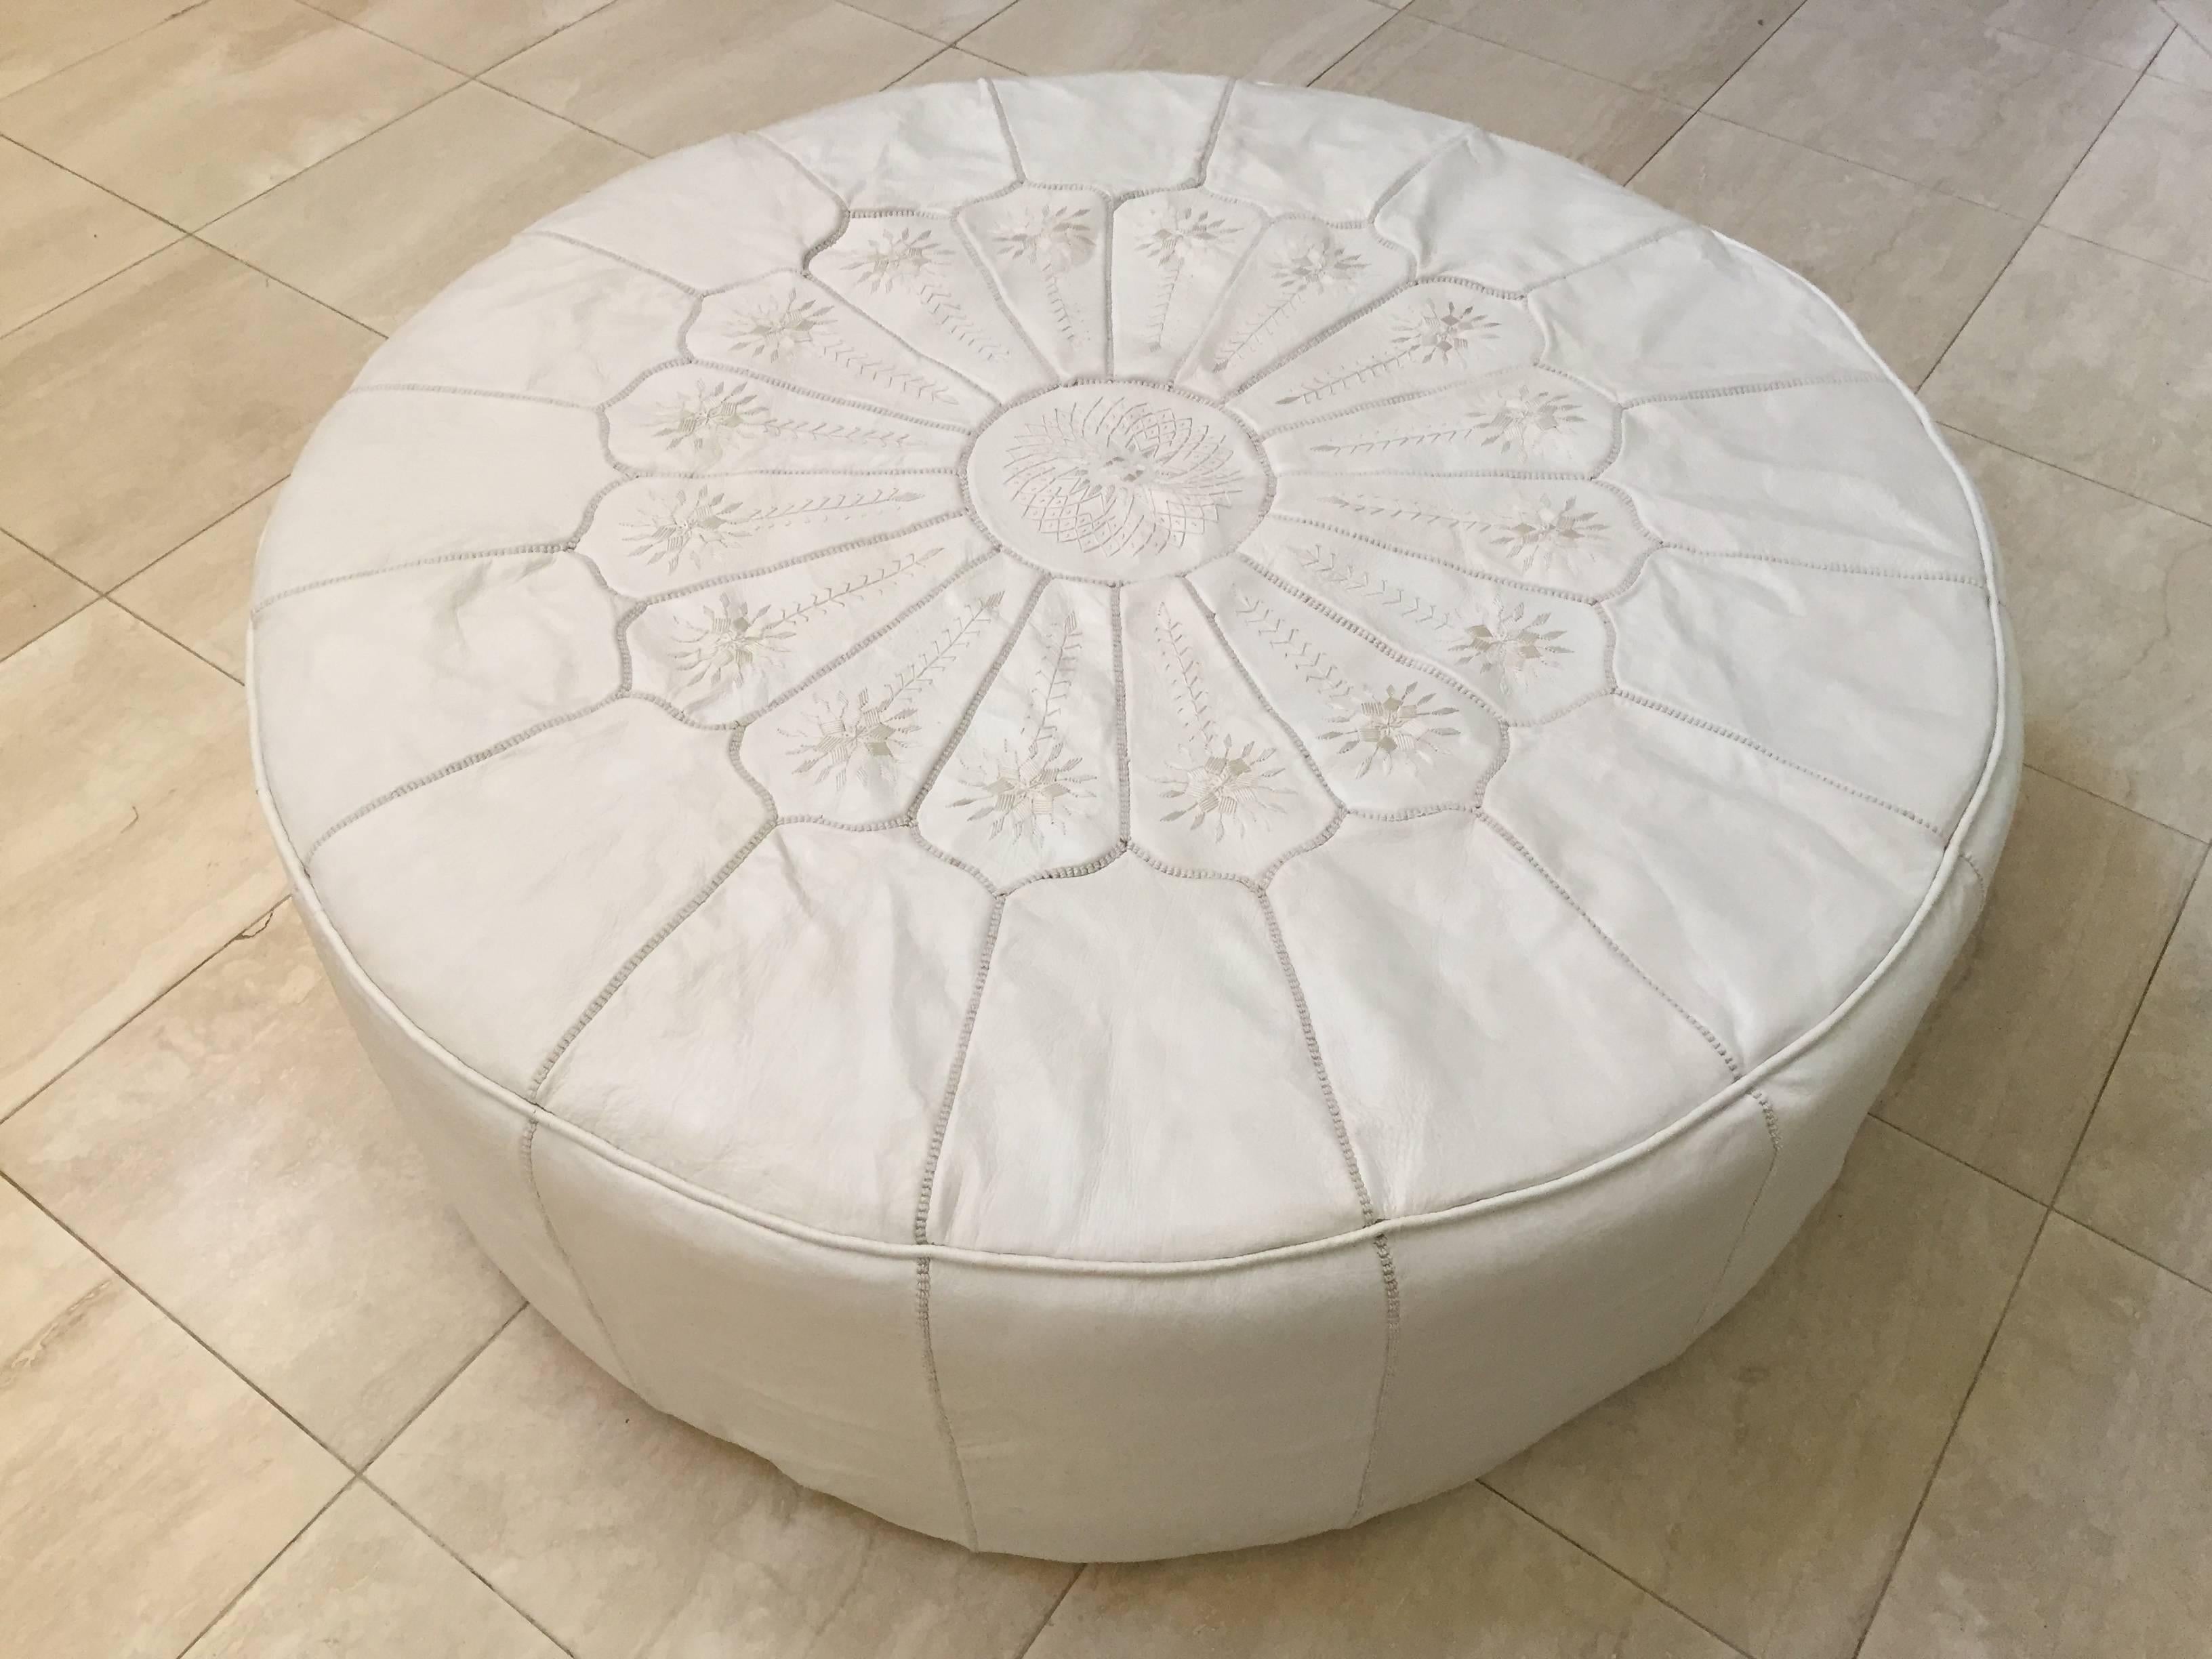 Large round white leather table ottoman, handcrafted in morocco by master artisans.
Hand embroidered leather with white silk thread with Moorish designs.
Great to use as a table or large ottoman, pouf.
Designed and created exclusively for